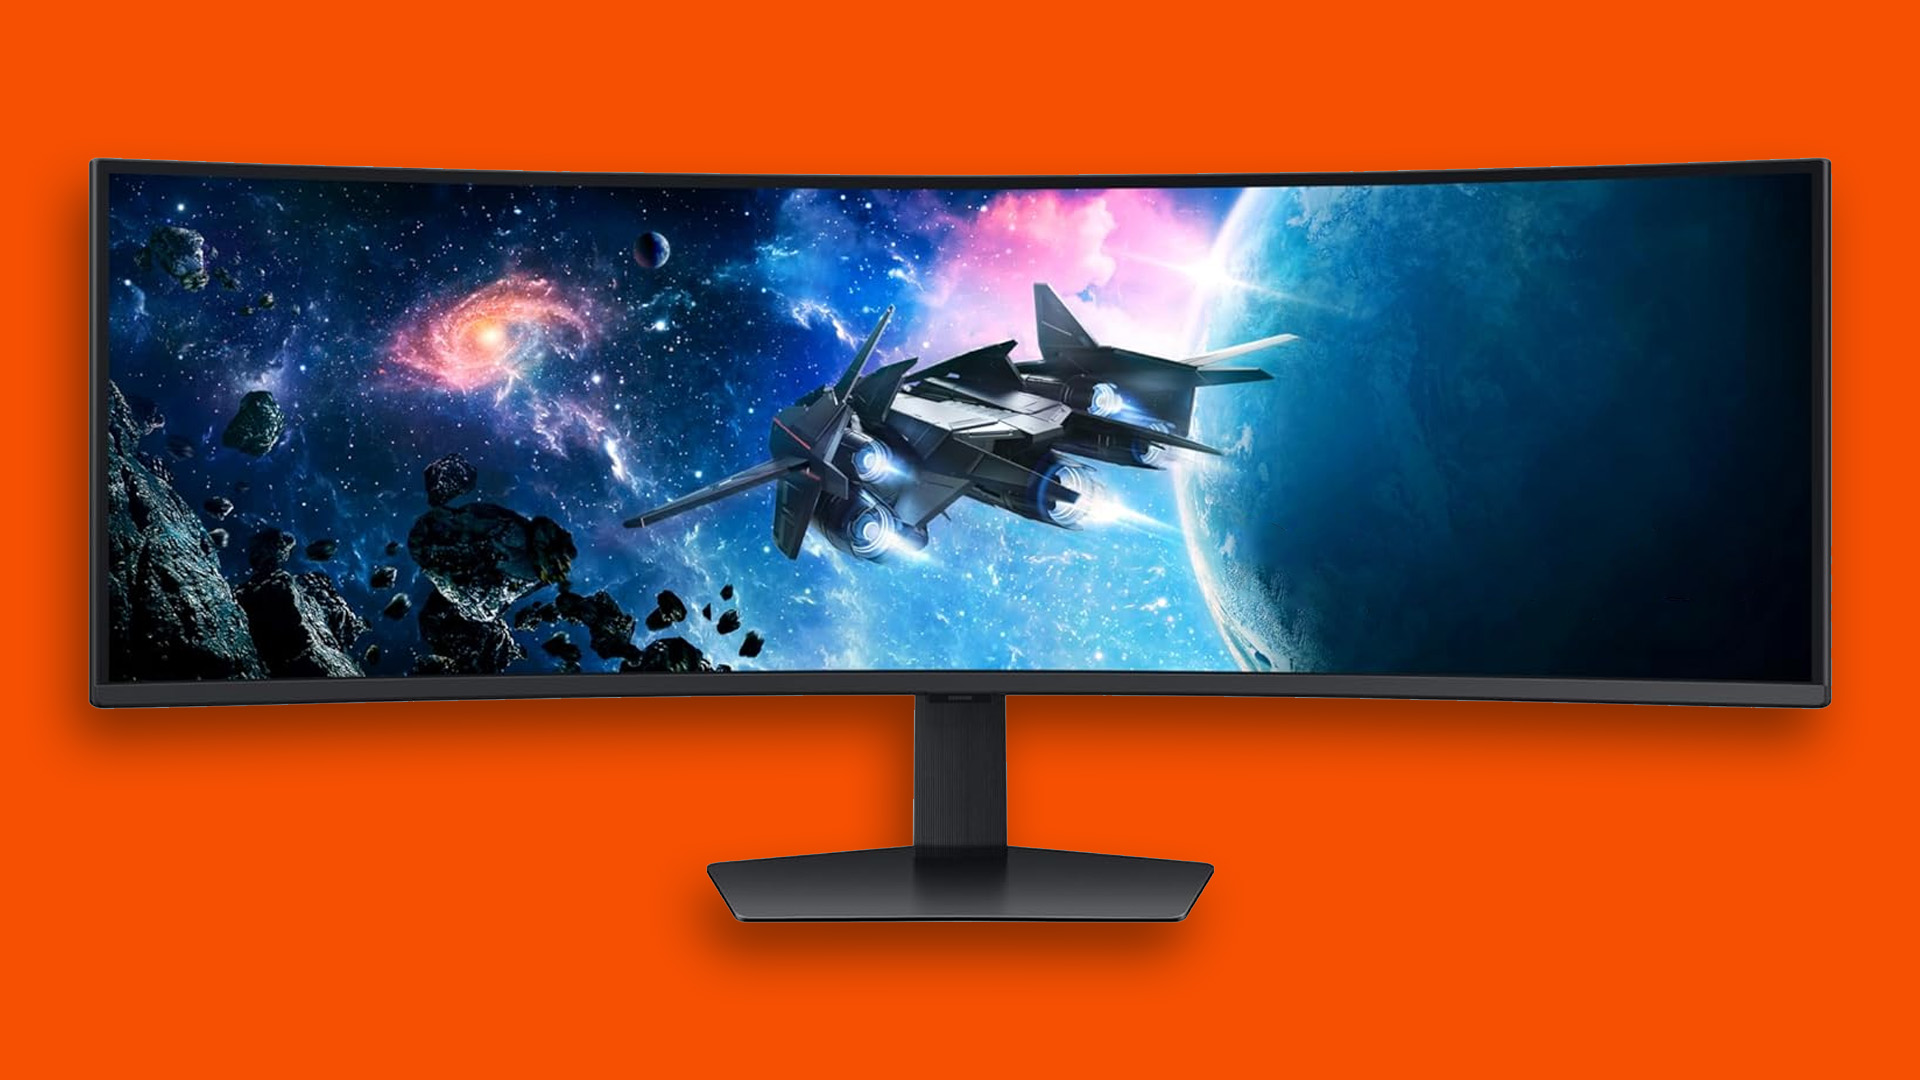 This Samsung 49-inch 240Hz gaming monitor is at its lowest ever price